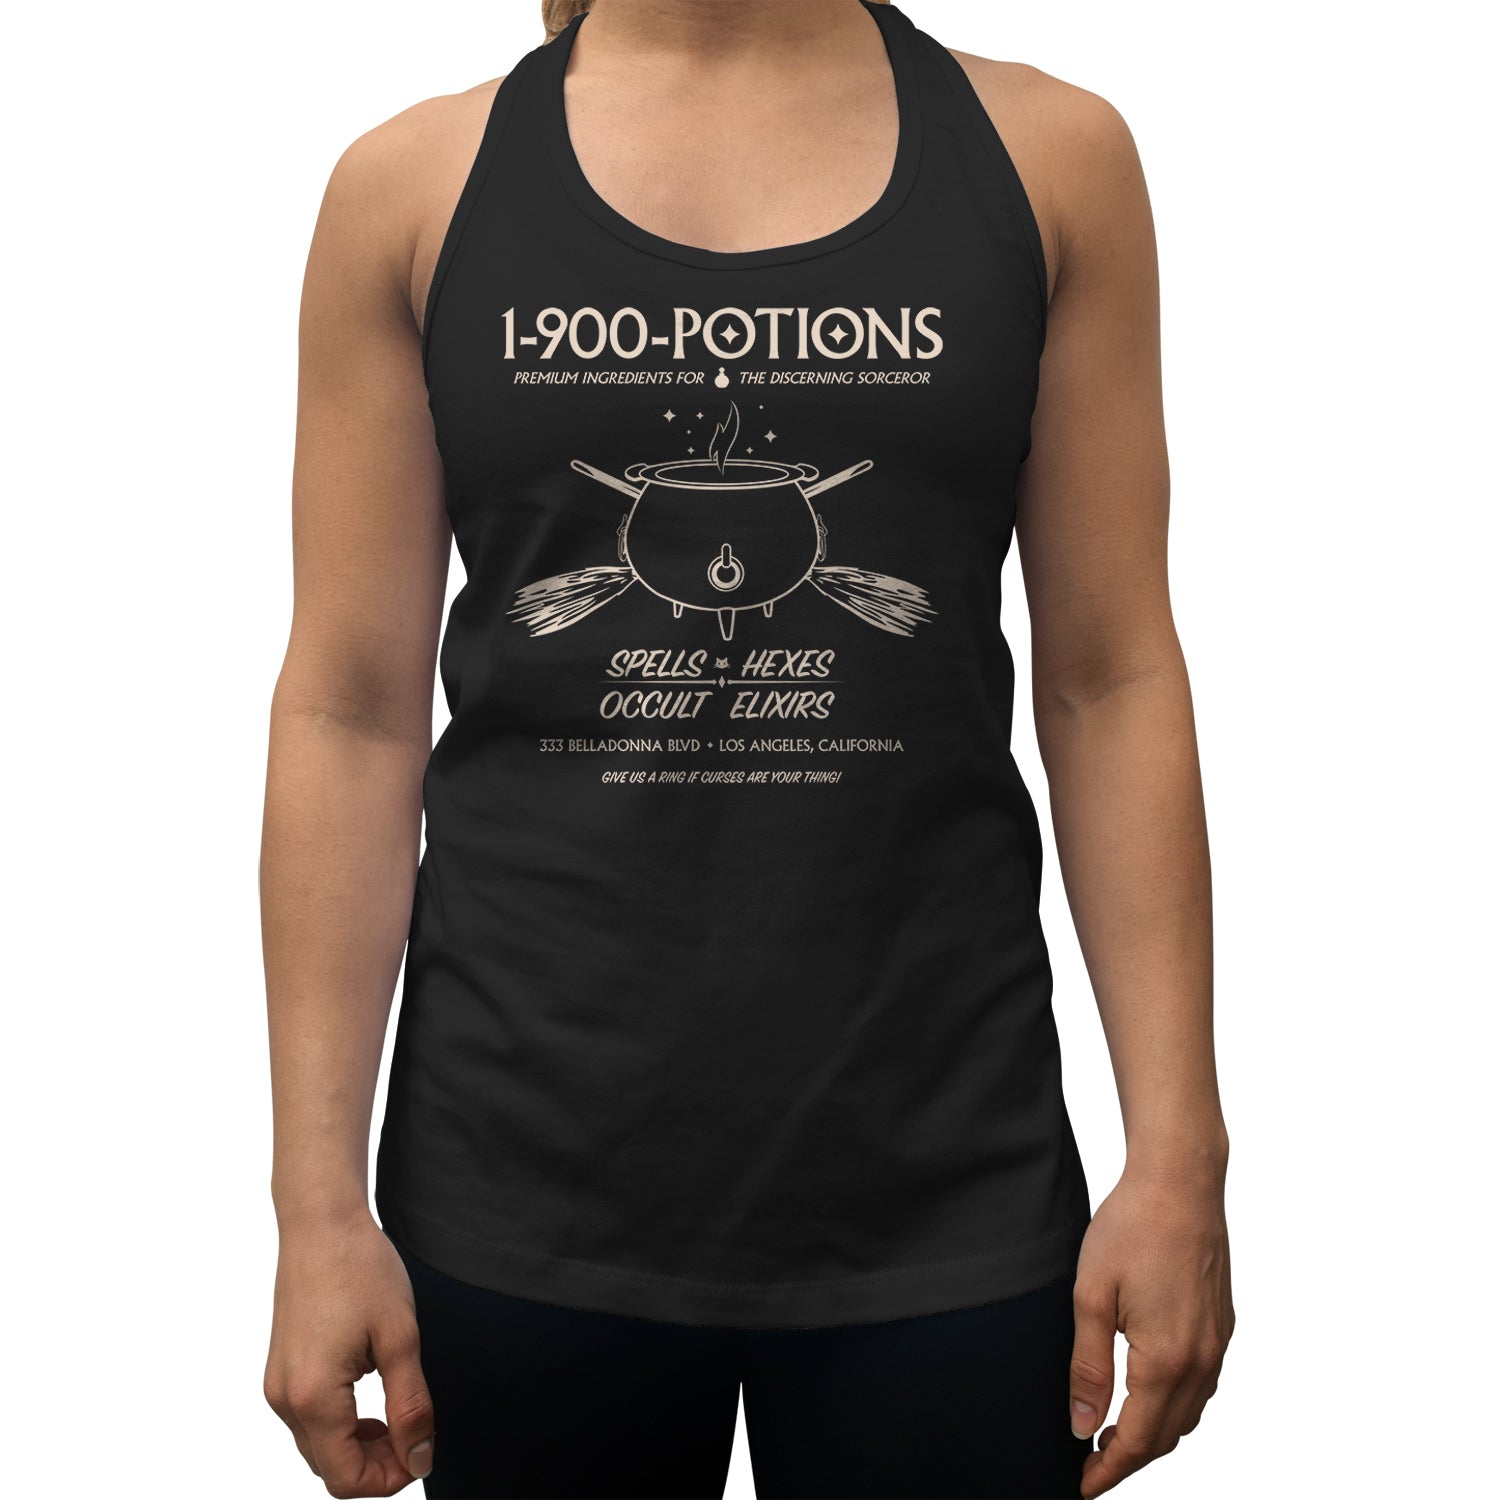 Women's 1 900 Potions Witch Racerback Tank Top